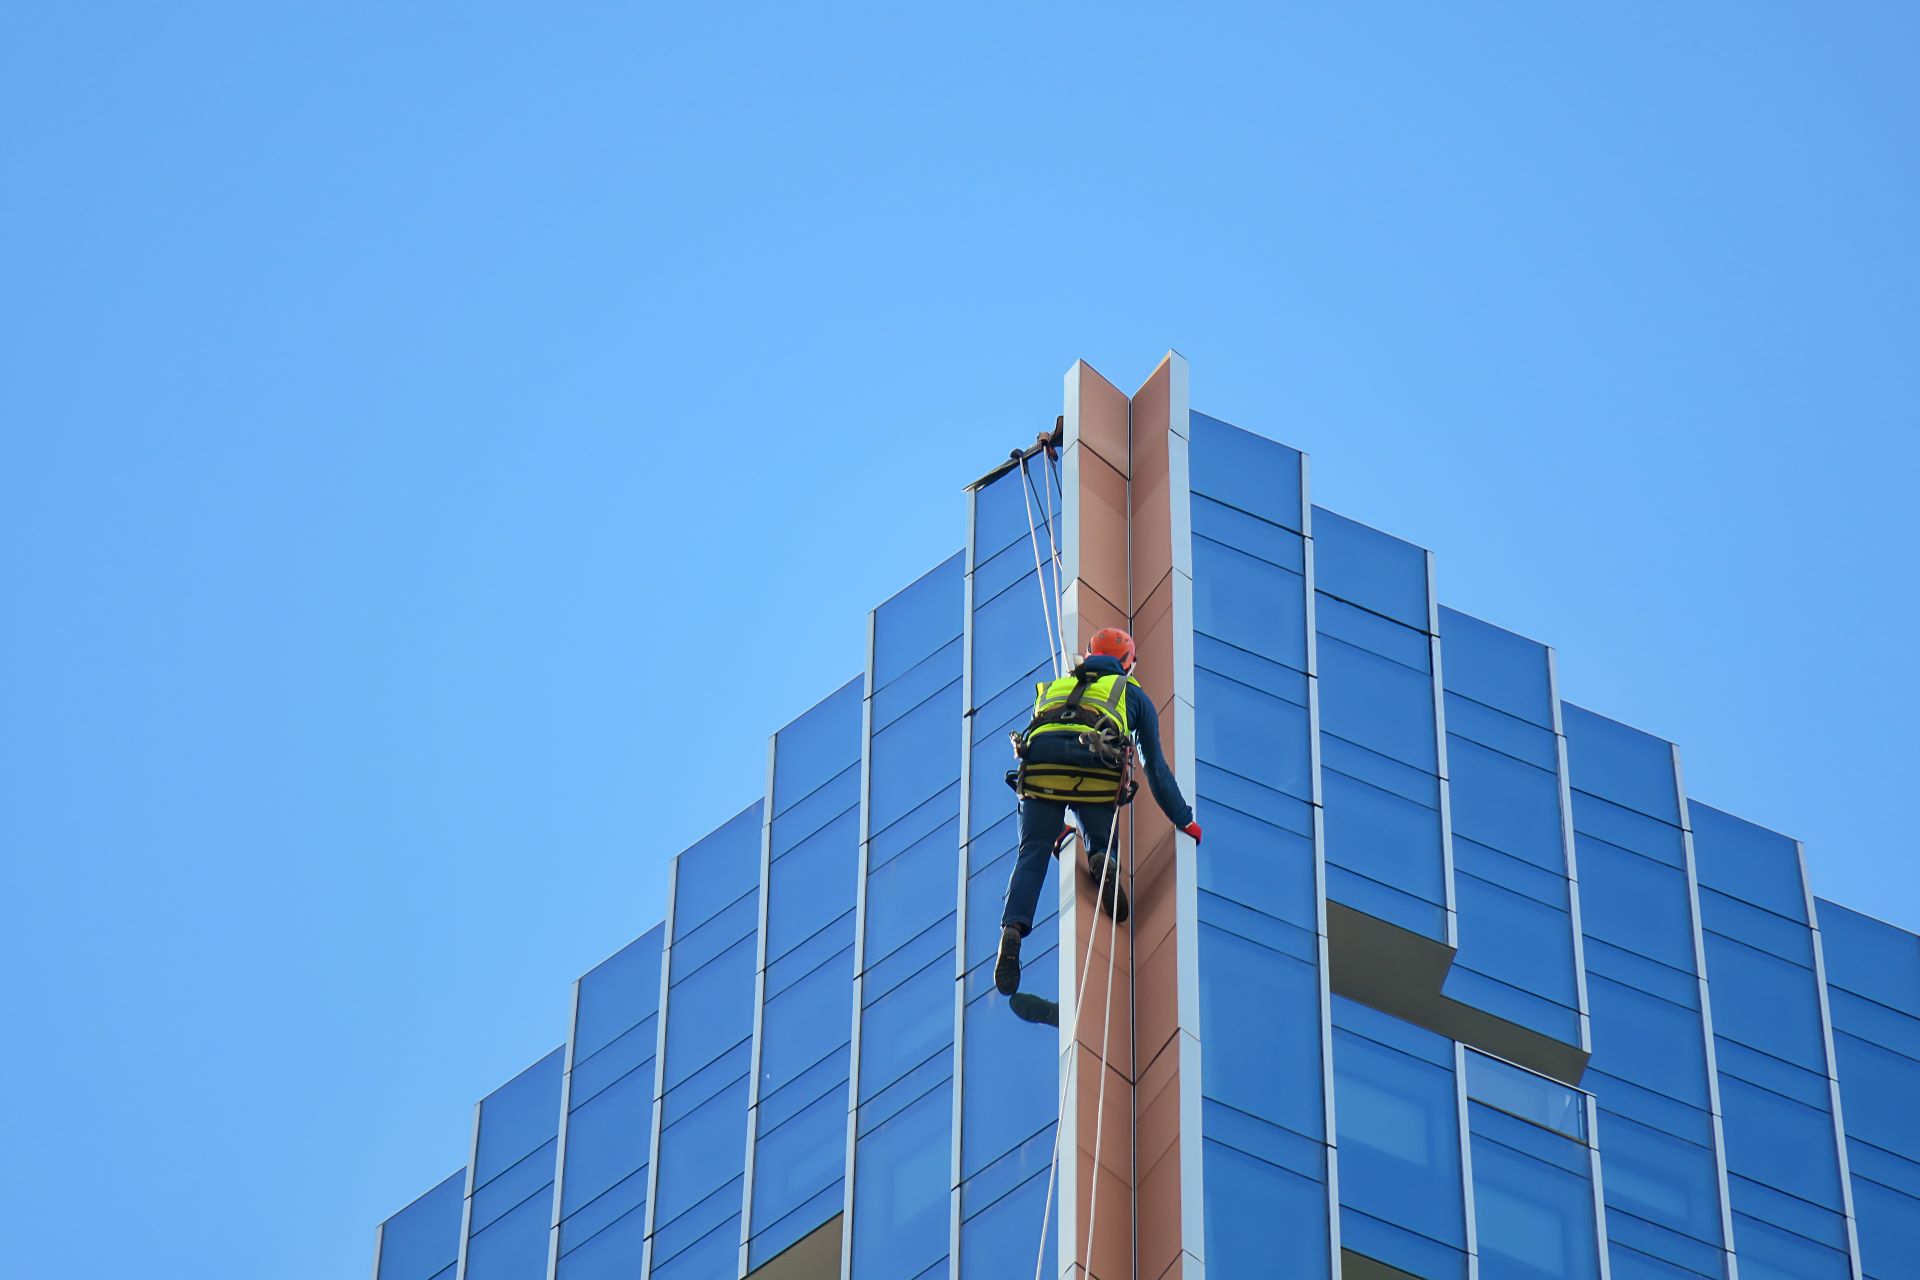 cladding cleaner climbing the building